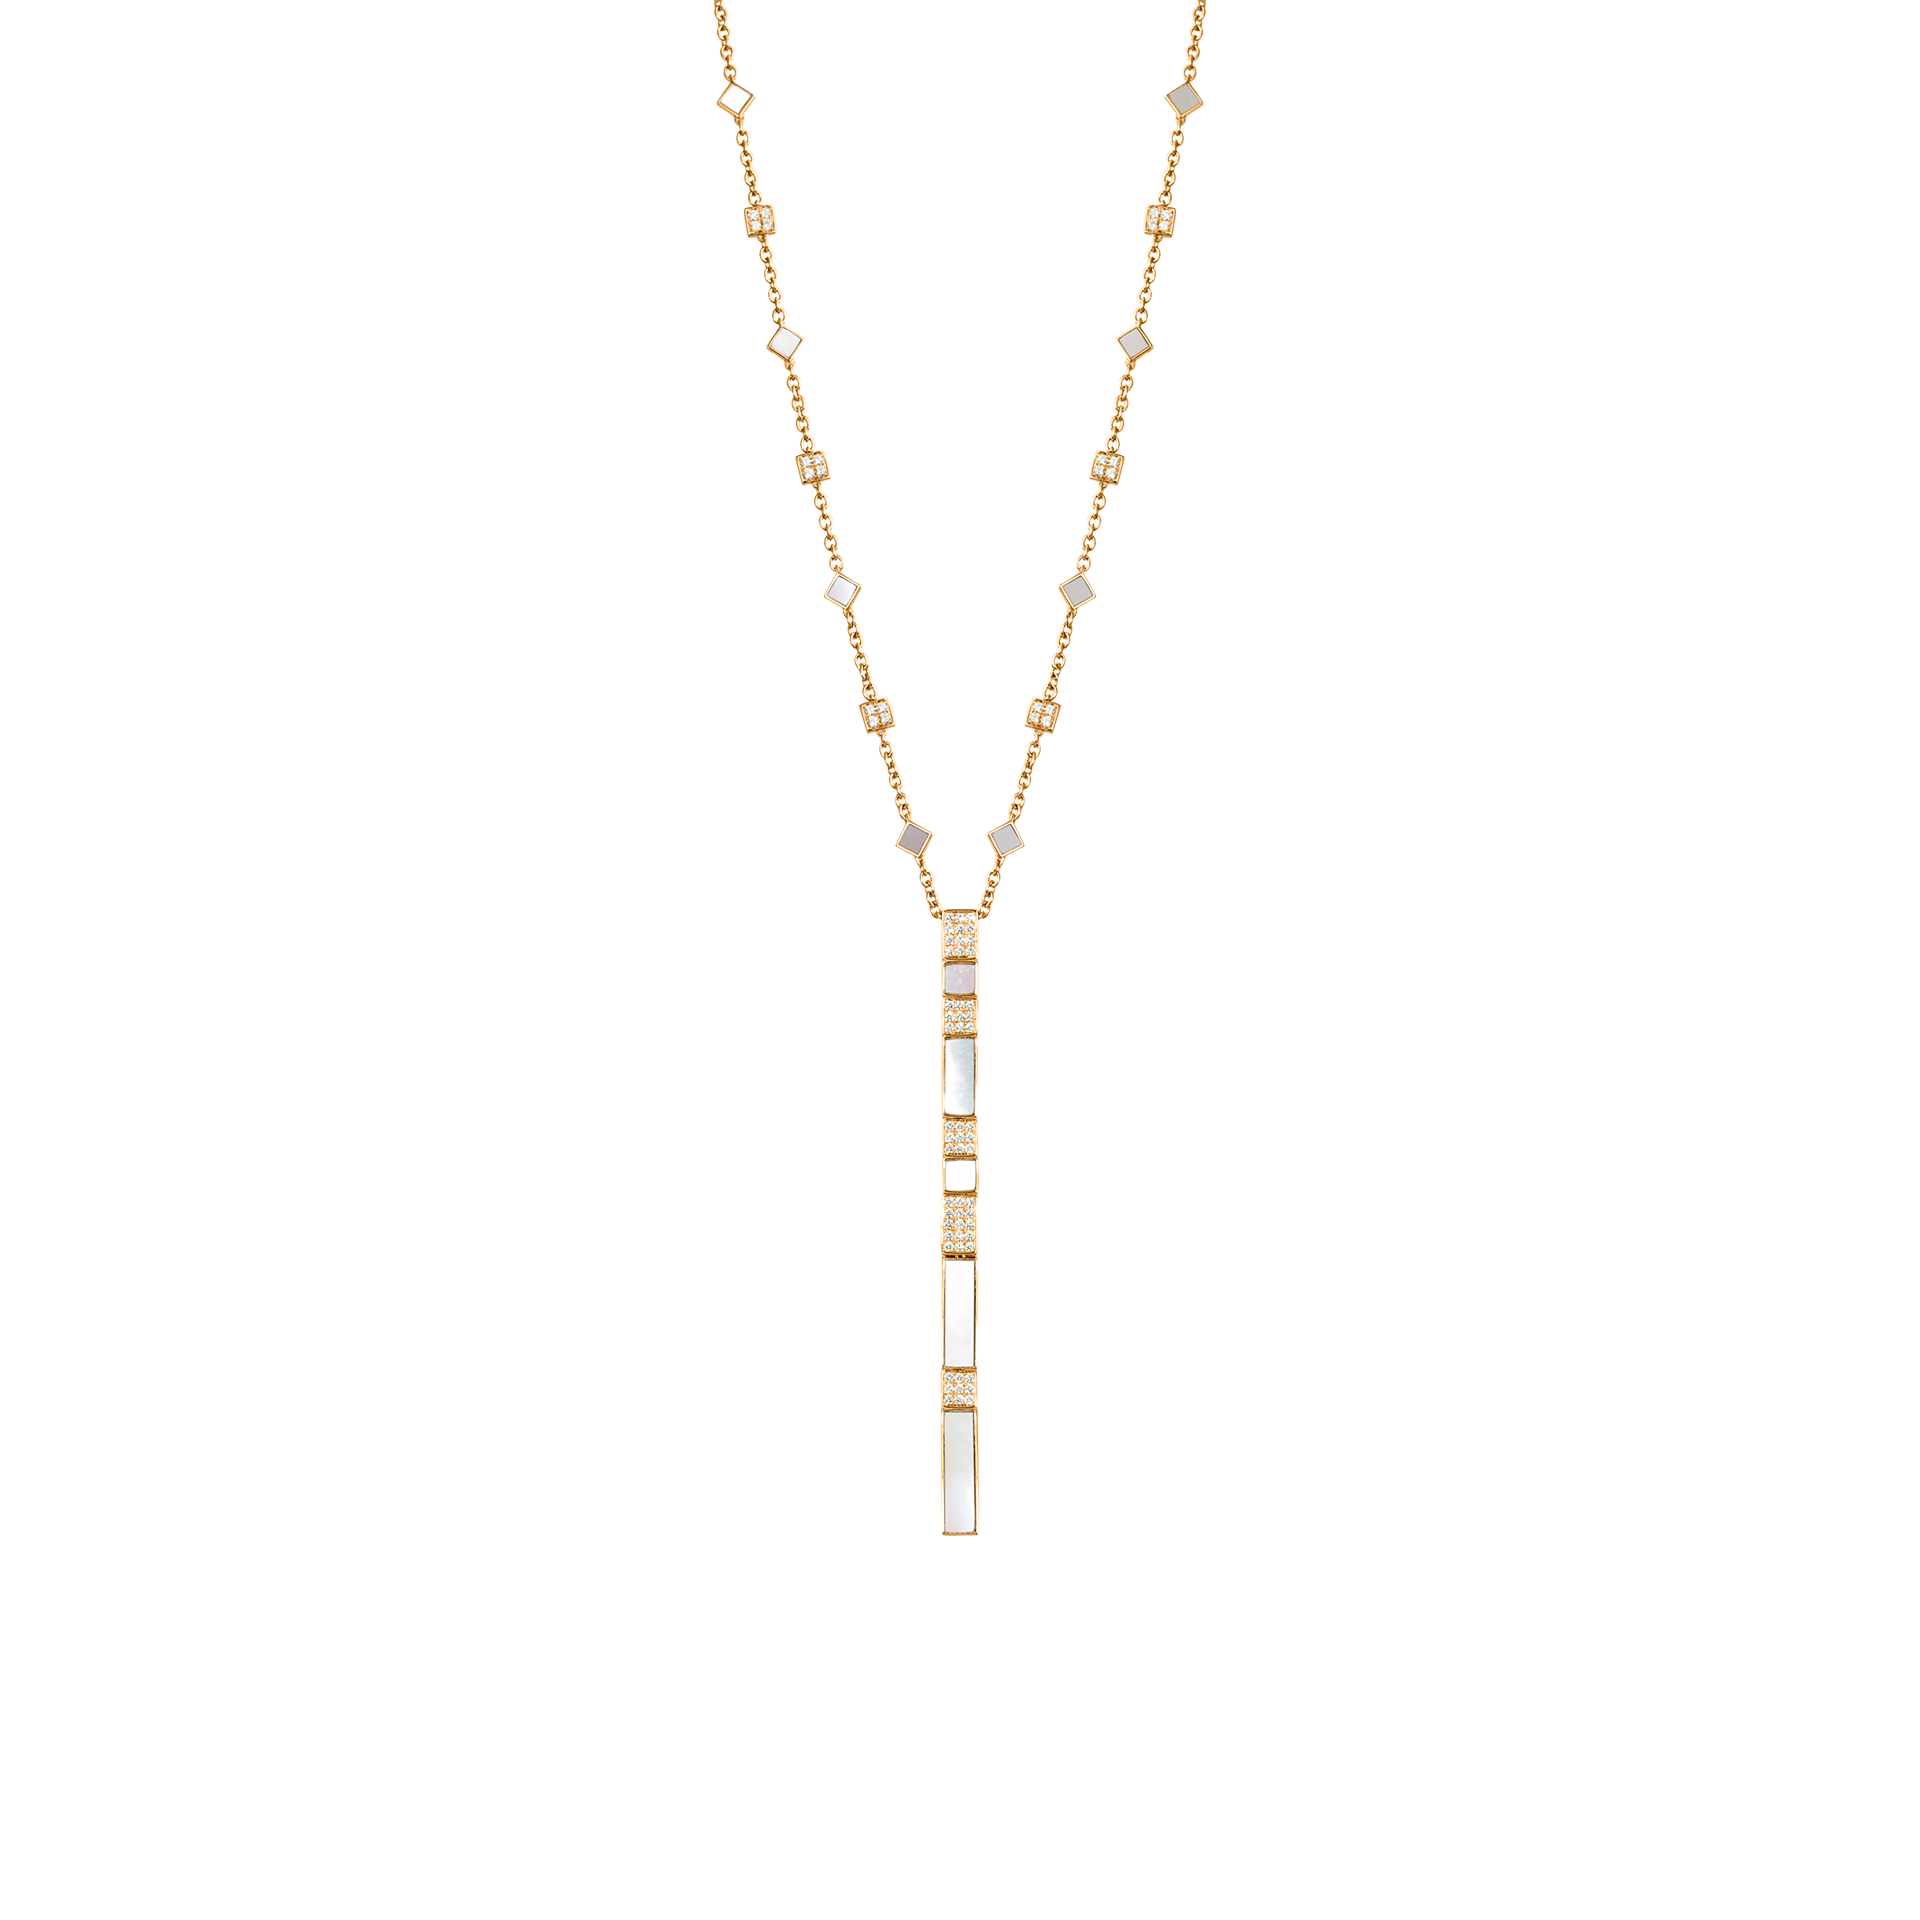 Nova White Mother of Pearl and Diamond Cascade Long Chain Pendant In 18K Yellow Gold